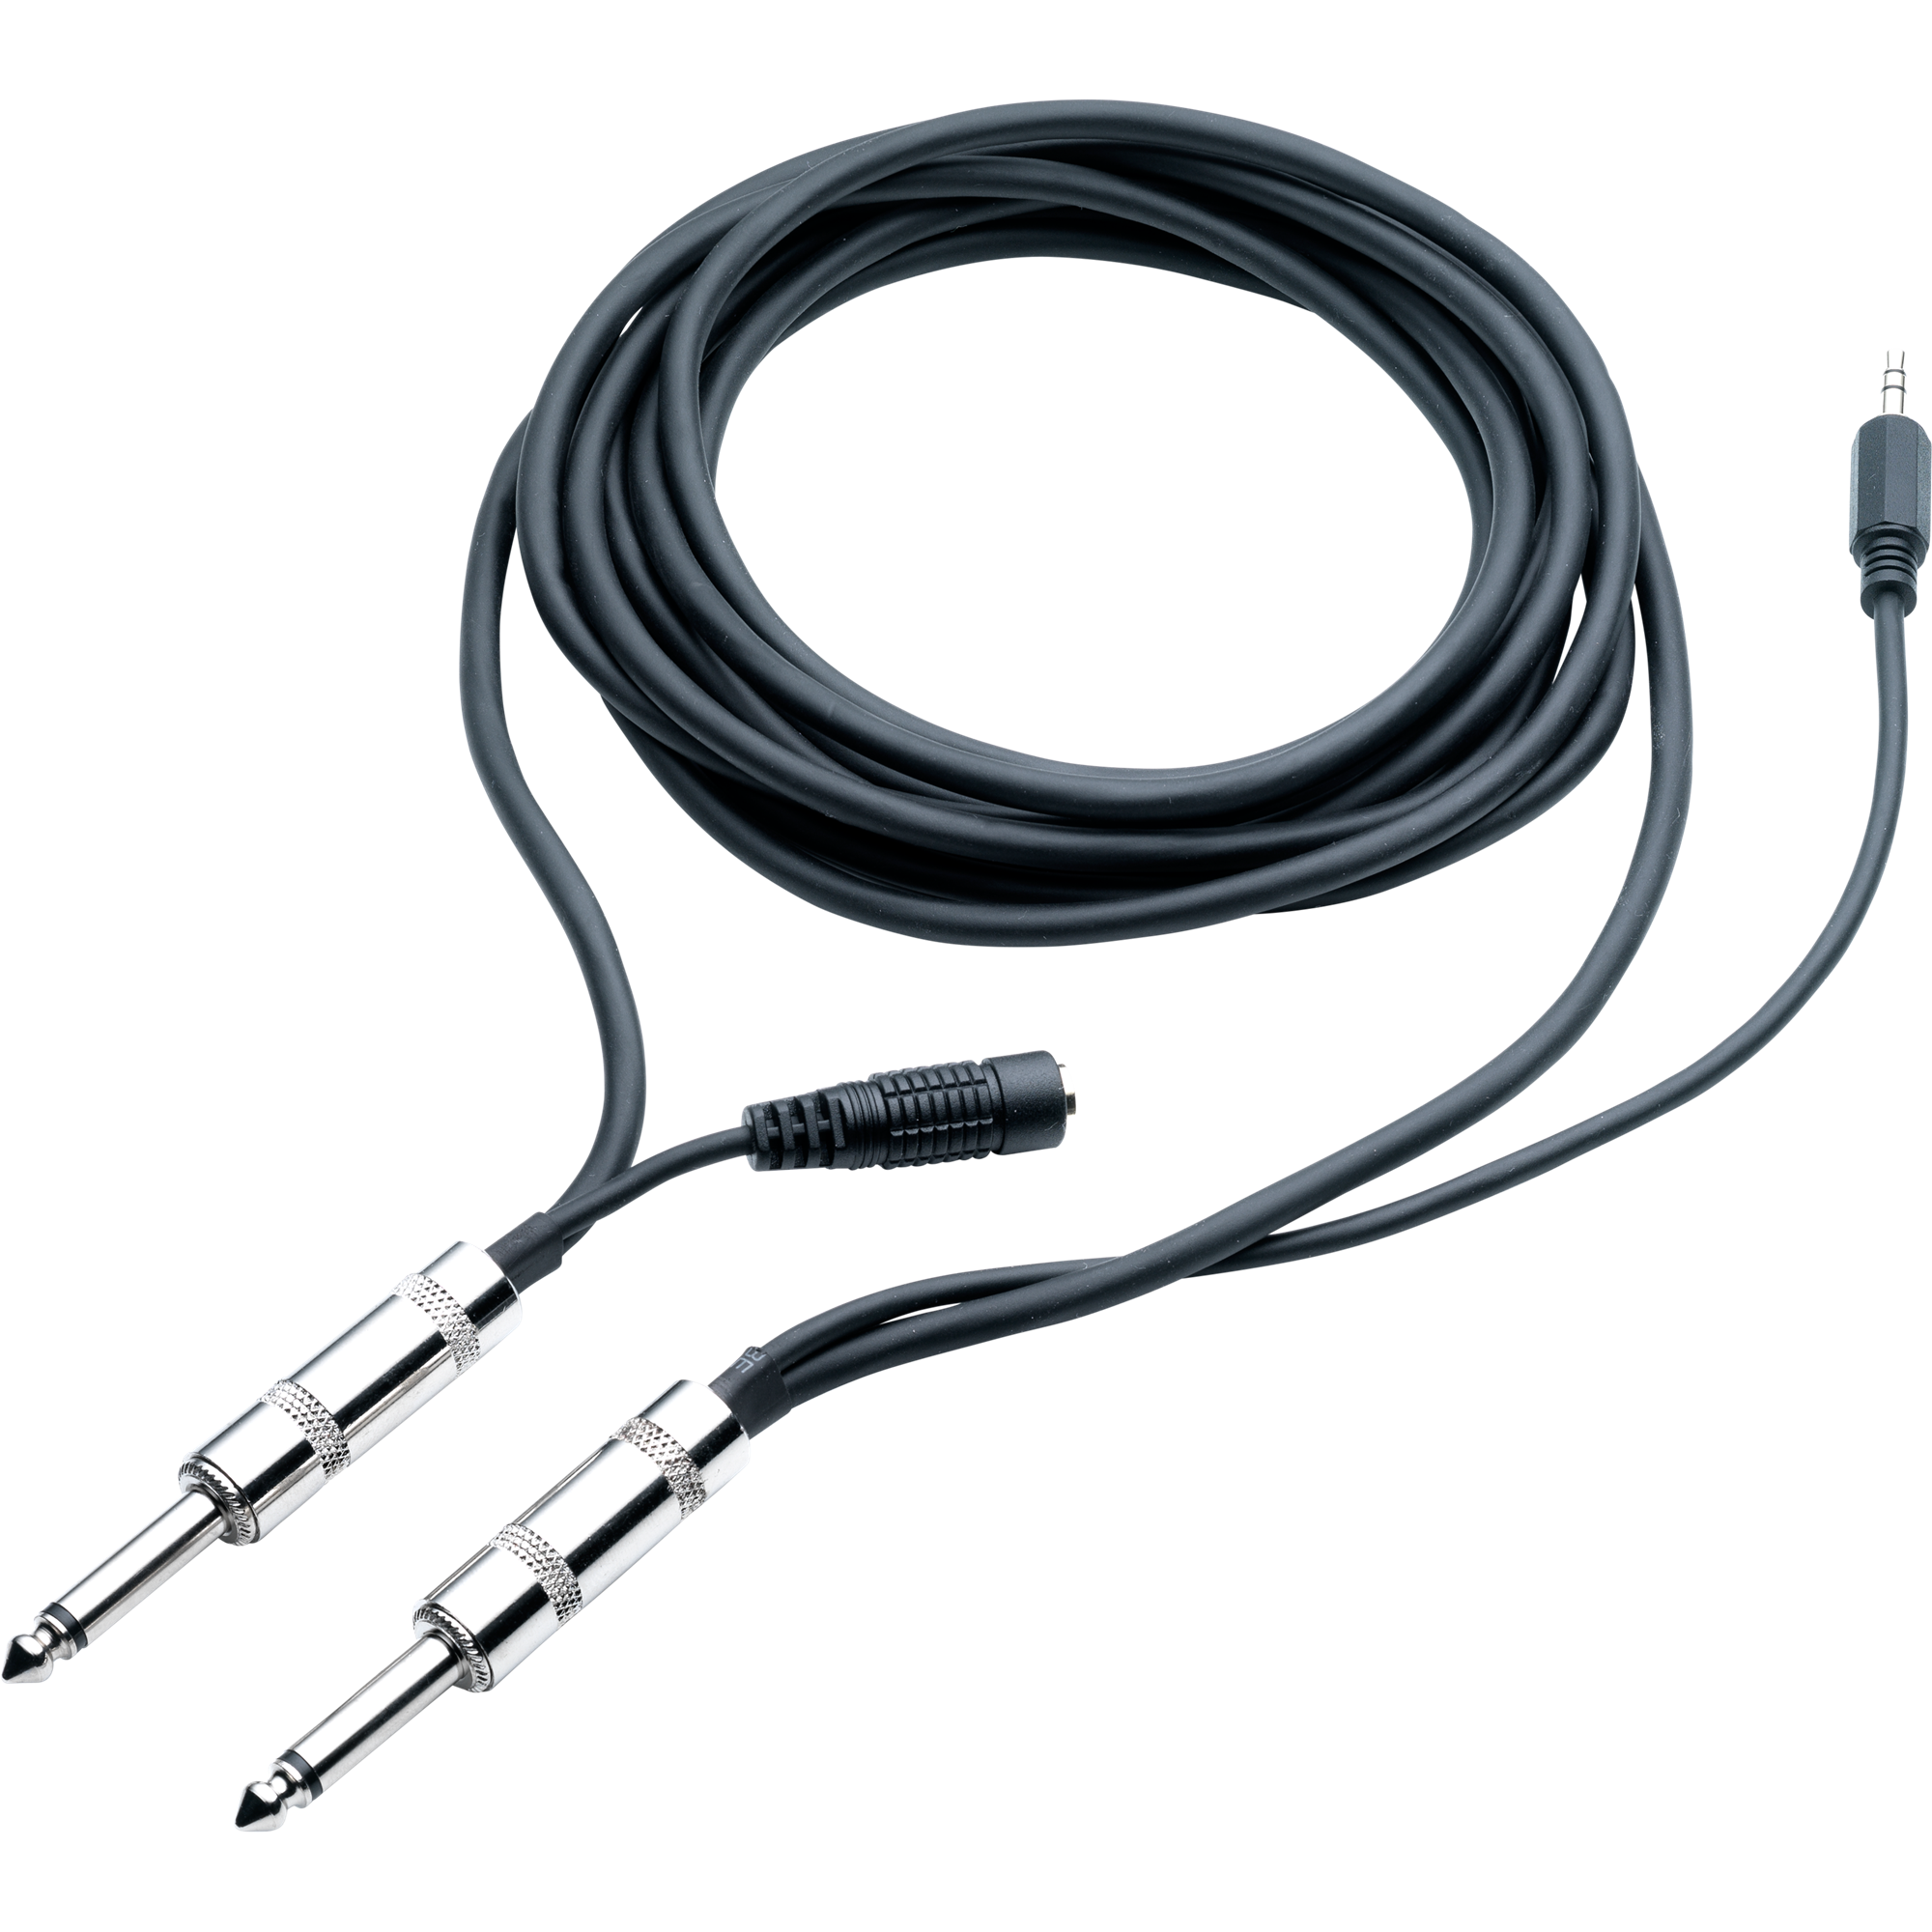 Plug clipart electrical conductor. Cable cord meridian connectors